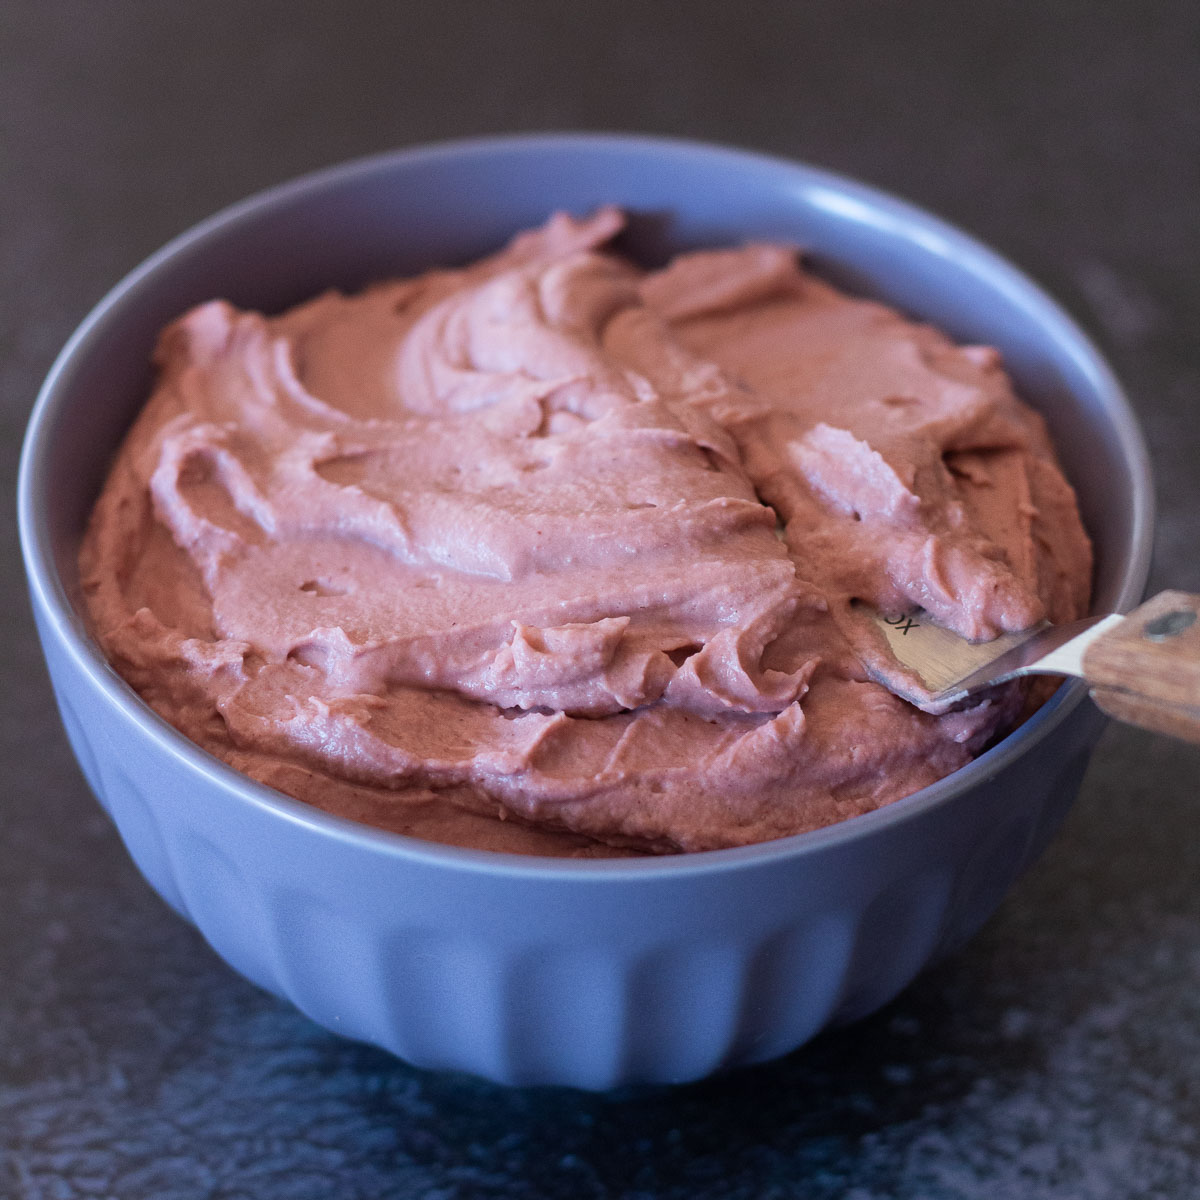 Dairy free strawberry frosting in a bowl, ready to frost some cakes!